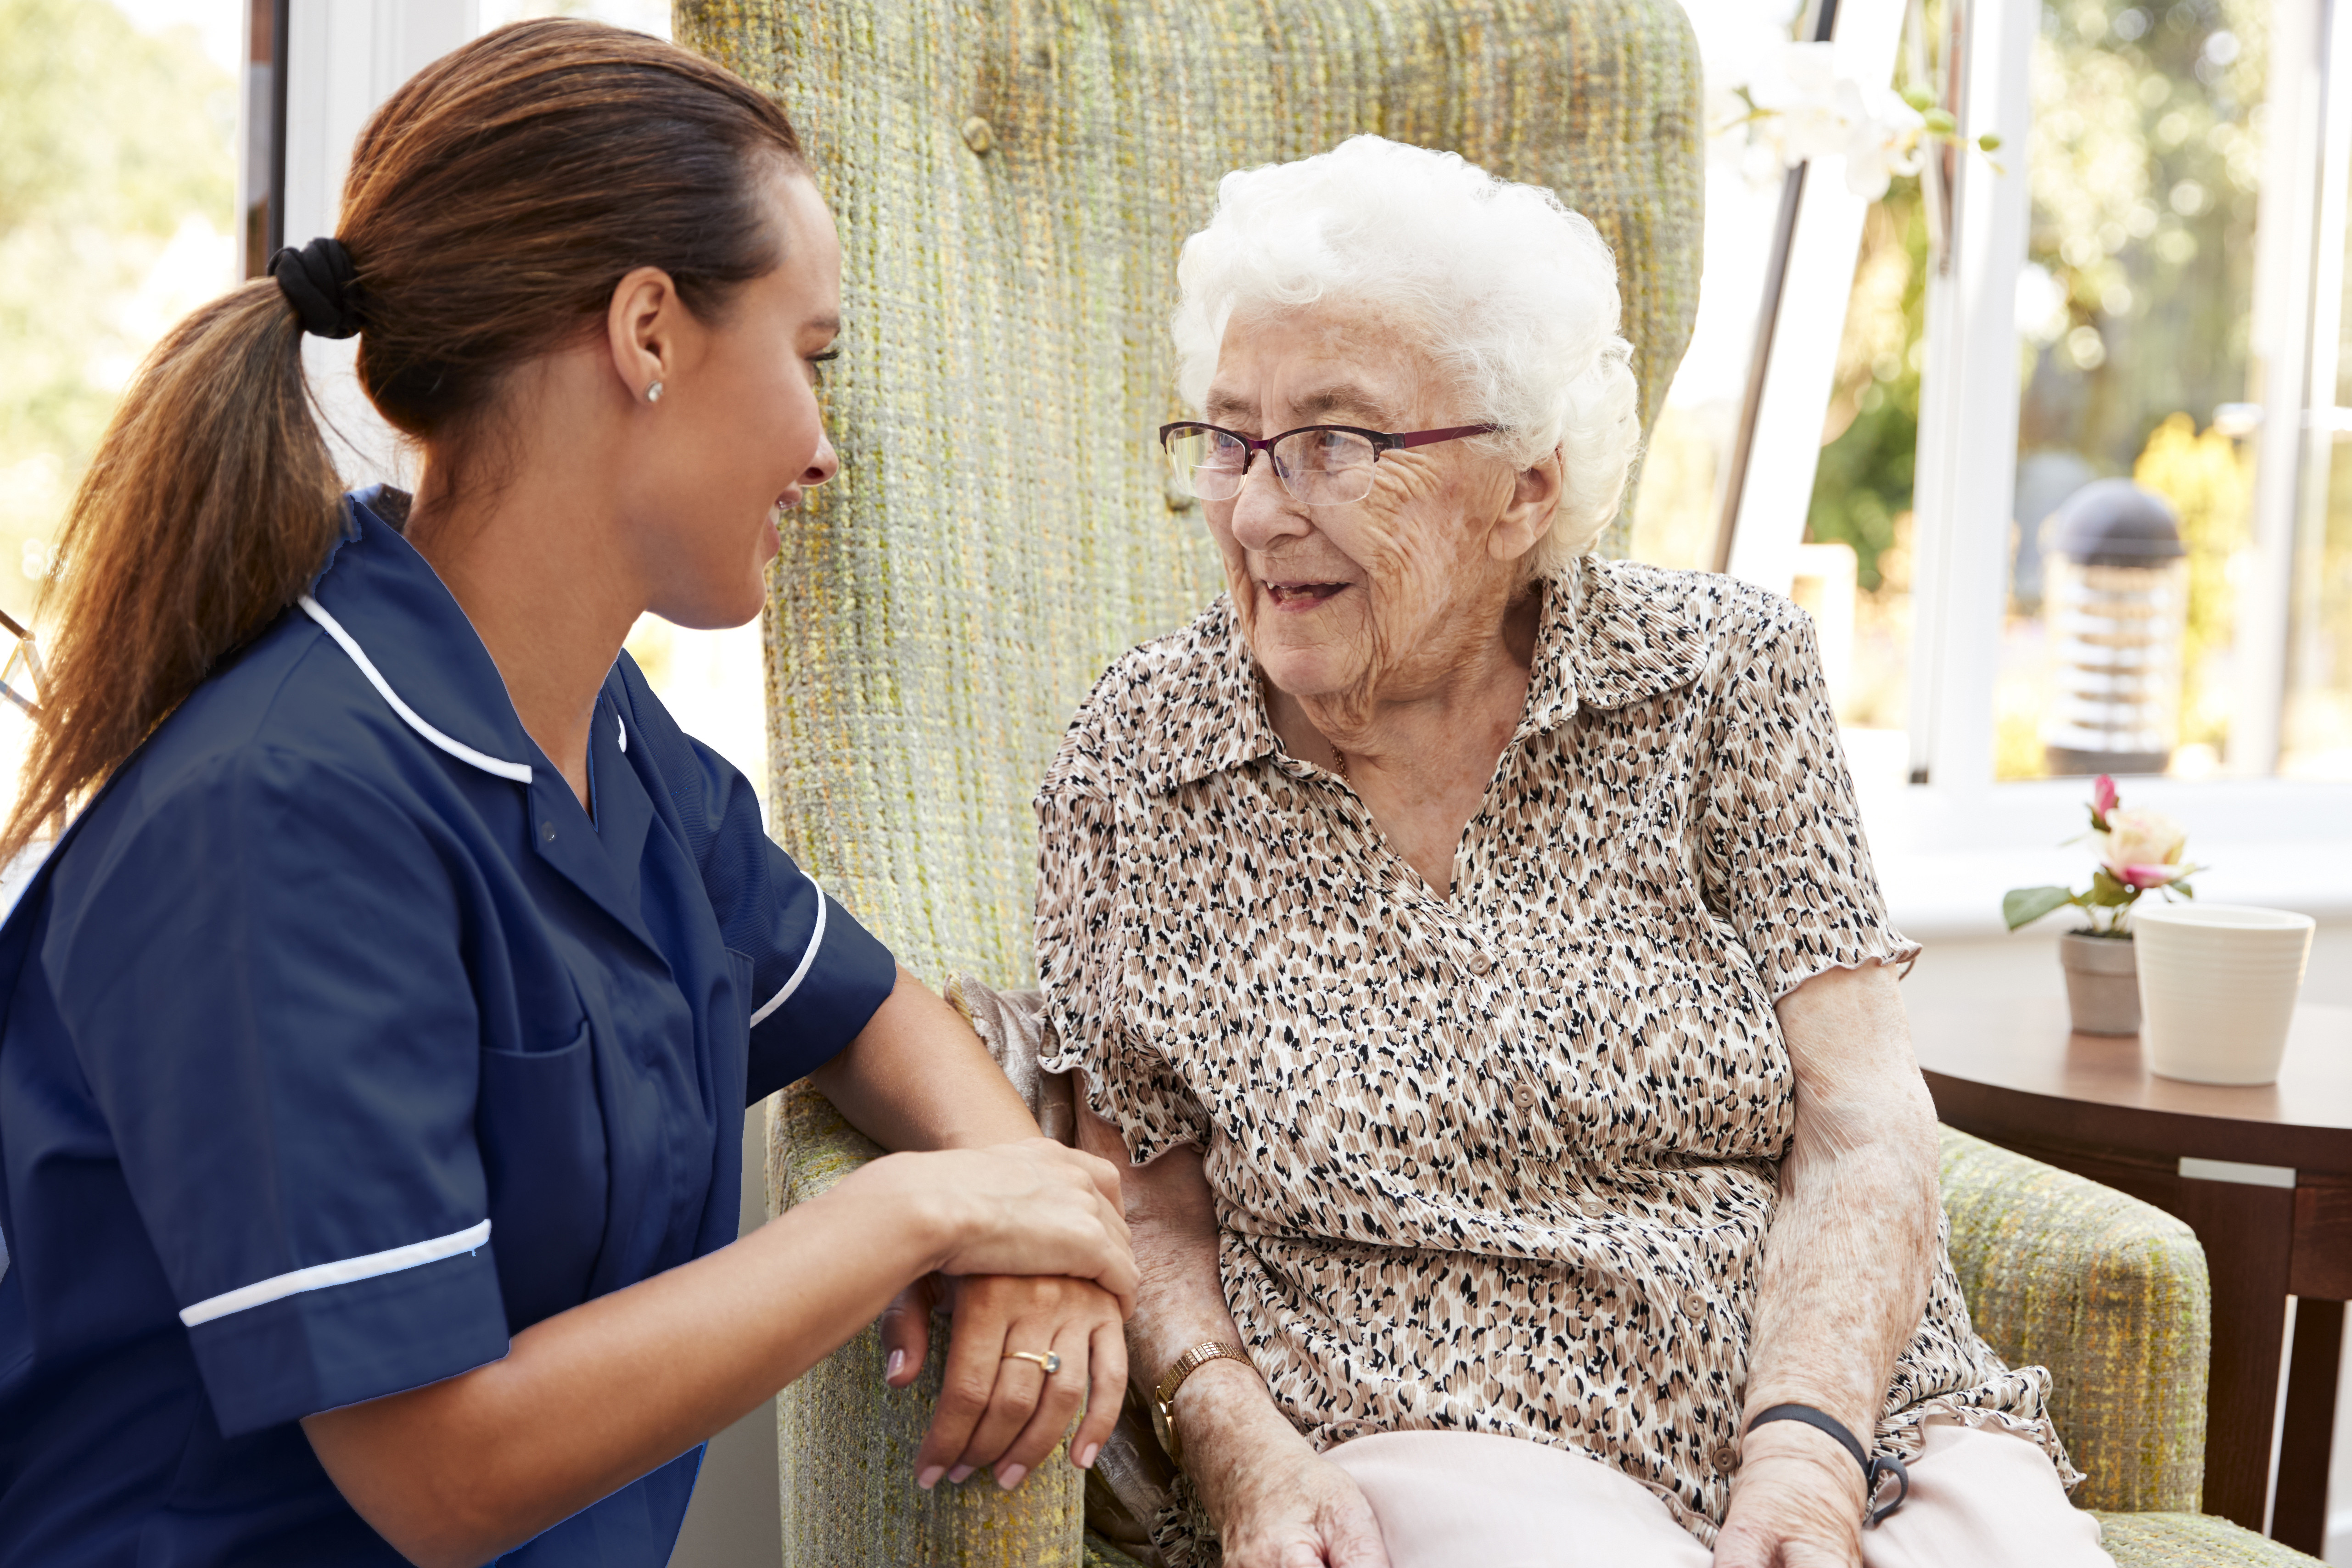 A nurse in a blue uniform is talking to an elderly woman who is sitting in a comfortable chair